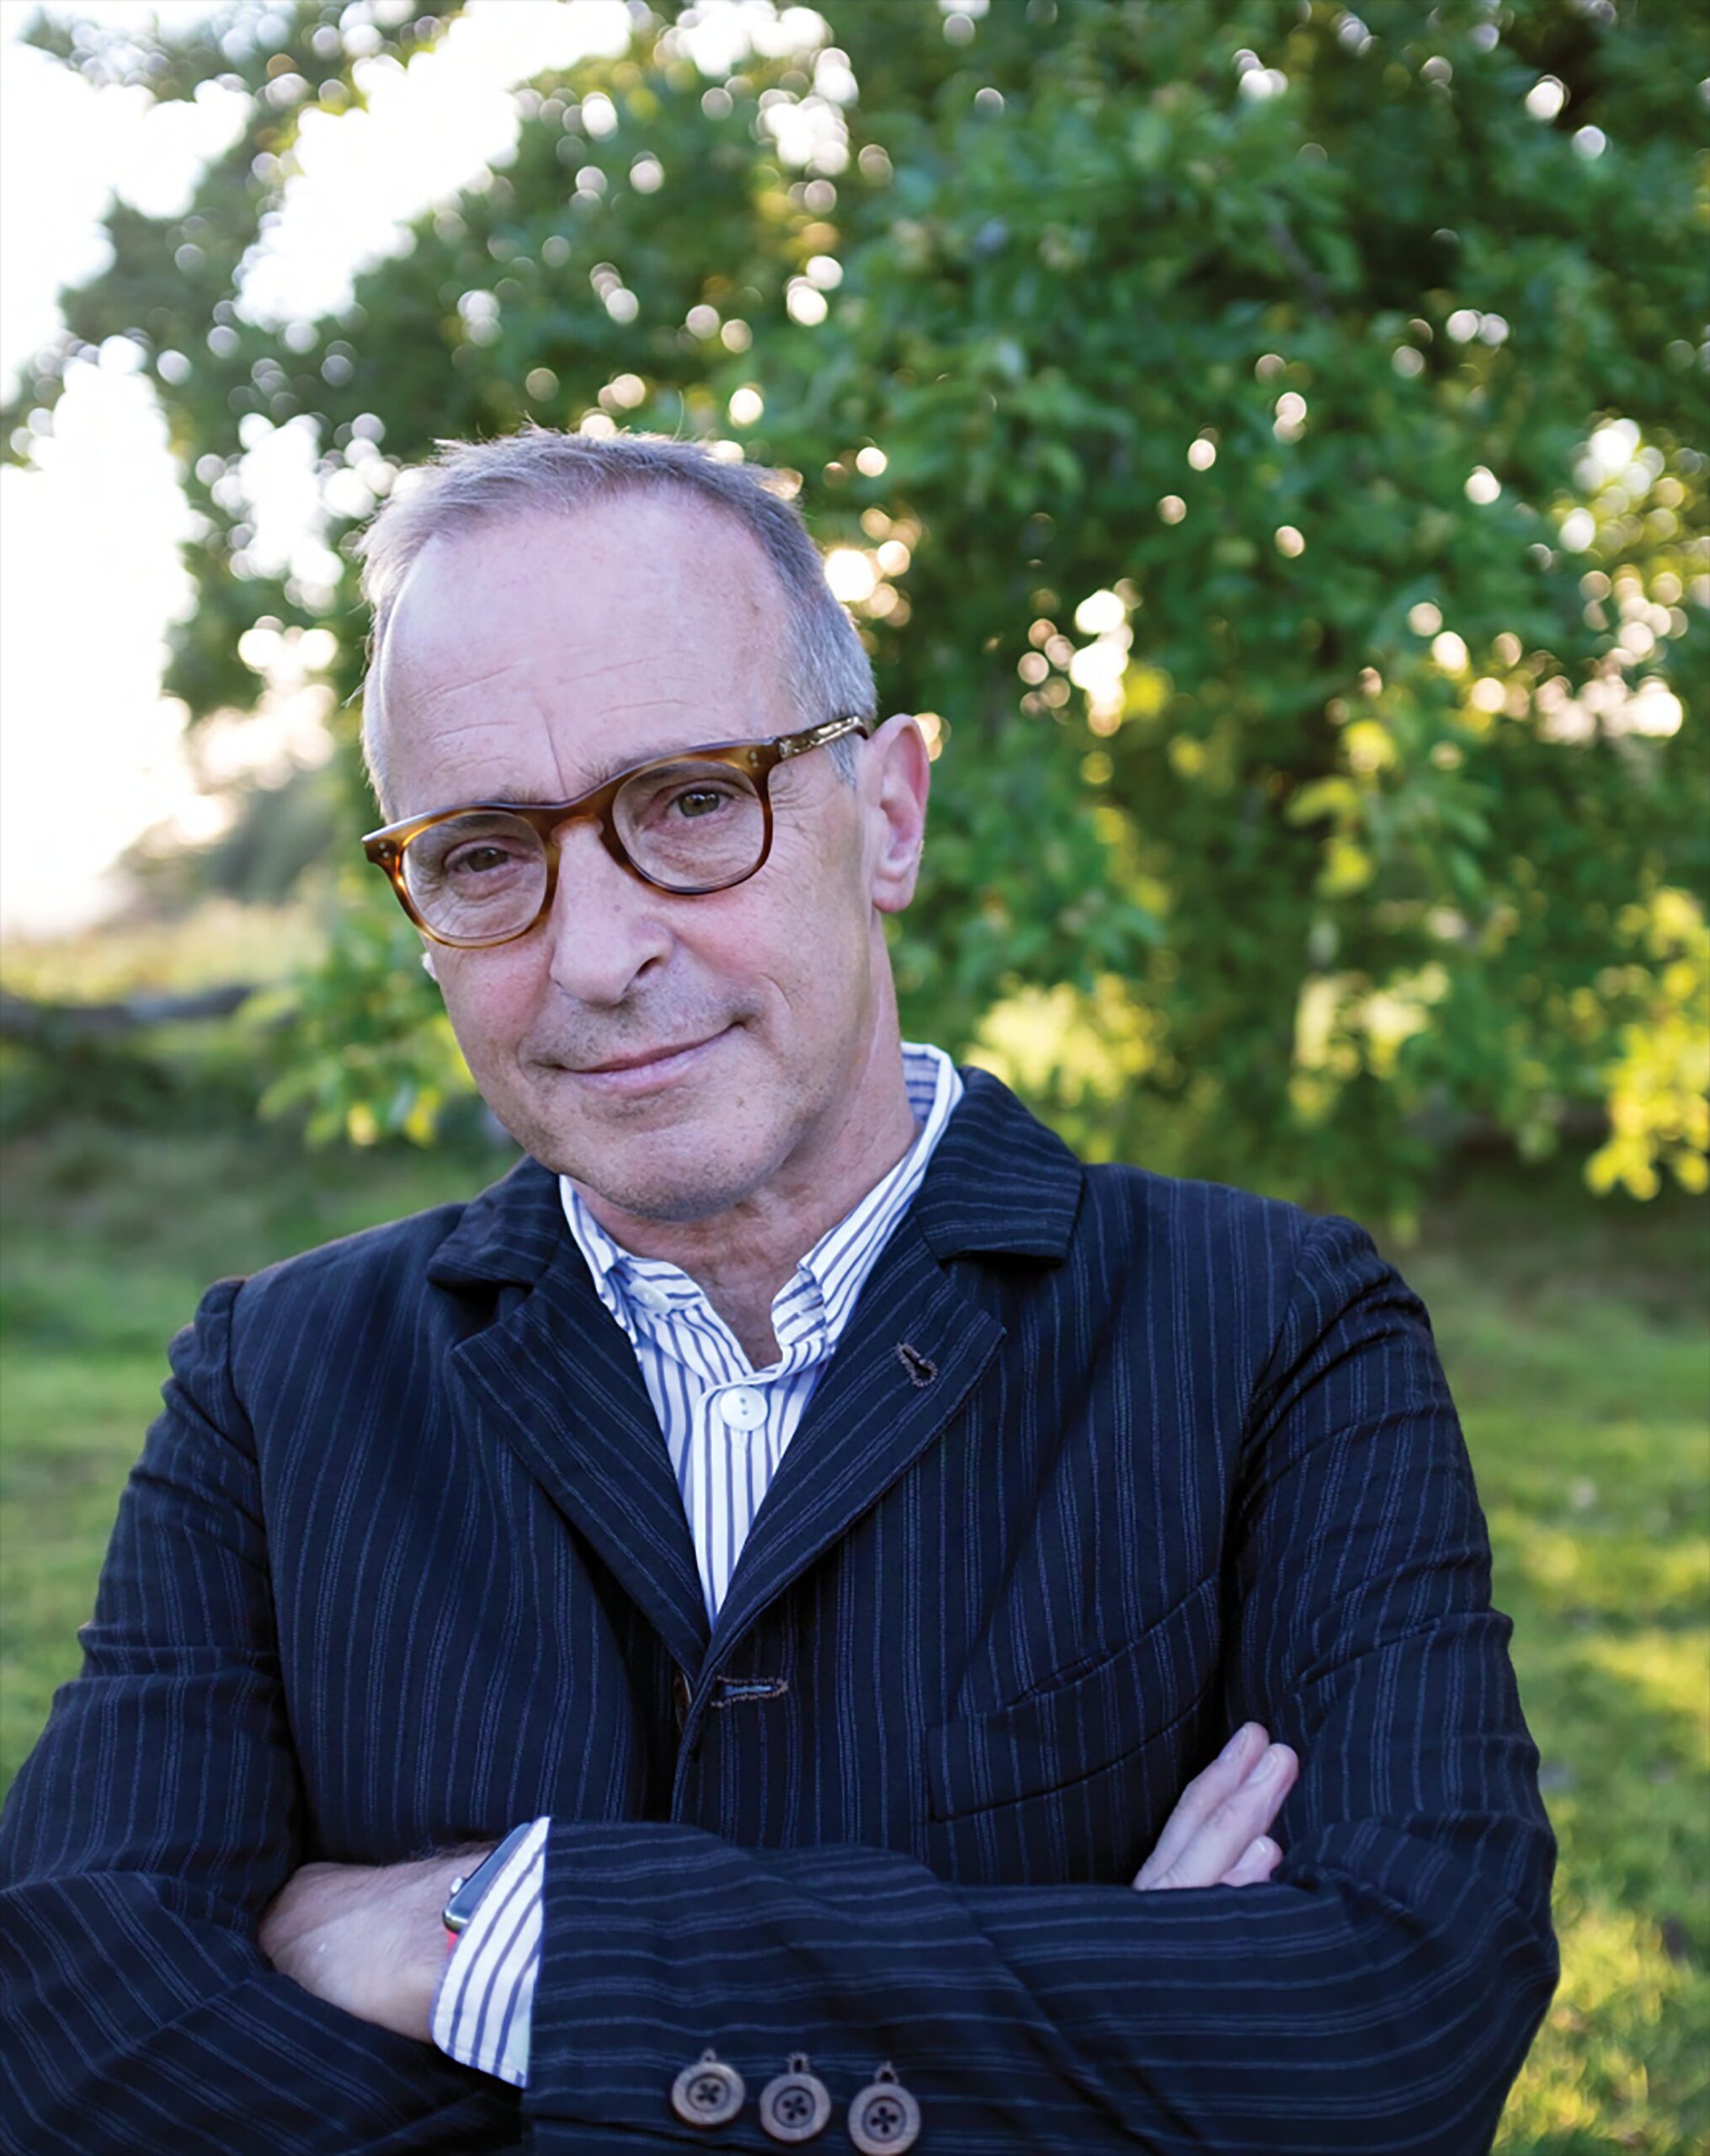 What Is David Sedaris Net Worth 2022-Is He Worth Millions Of Dollars? Facts To Know